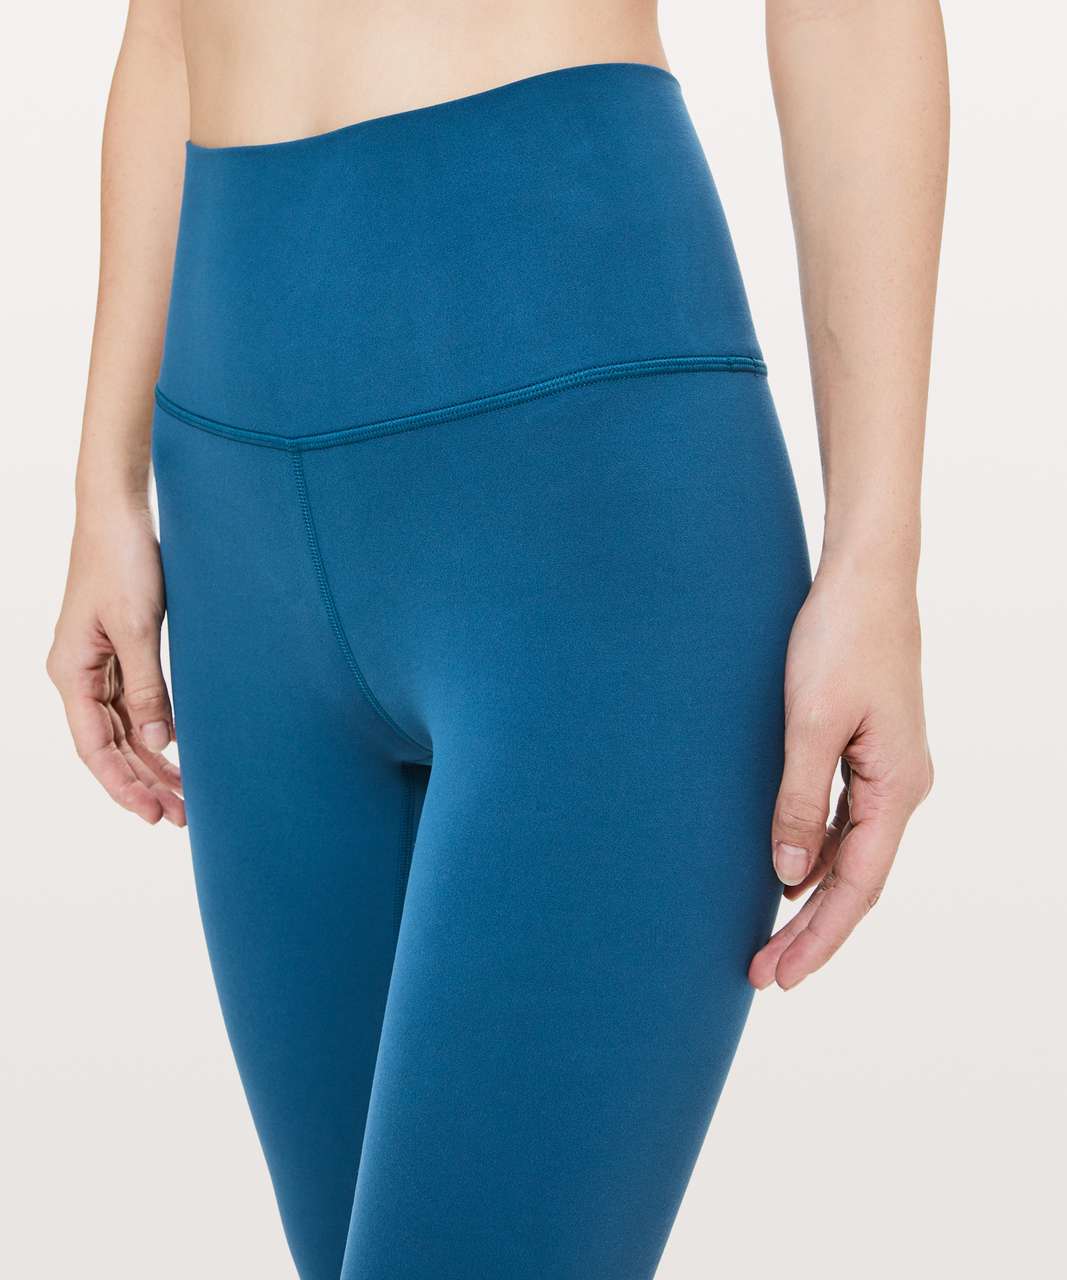 Lululemon Align Pant Full Length *Special Edition 28" - Carbon Blue